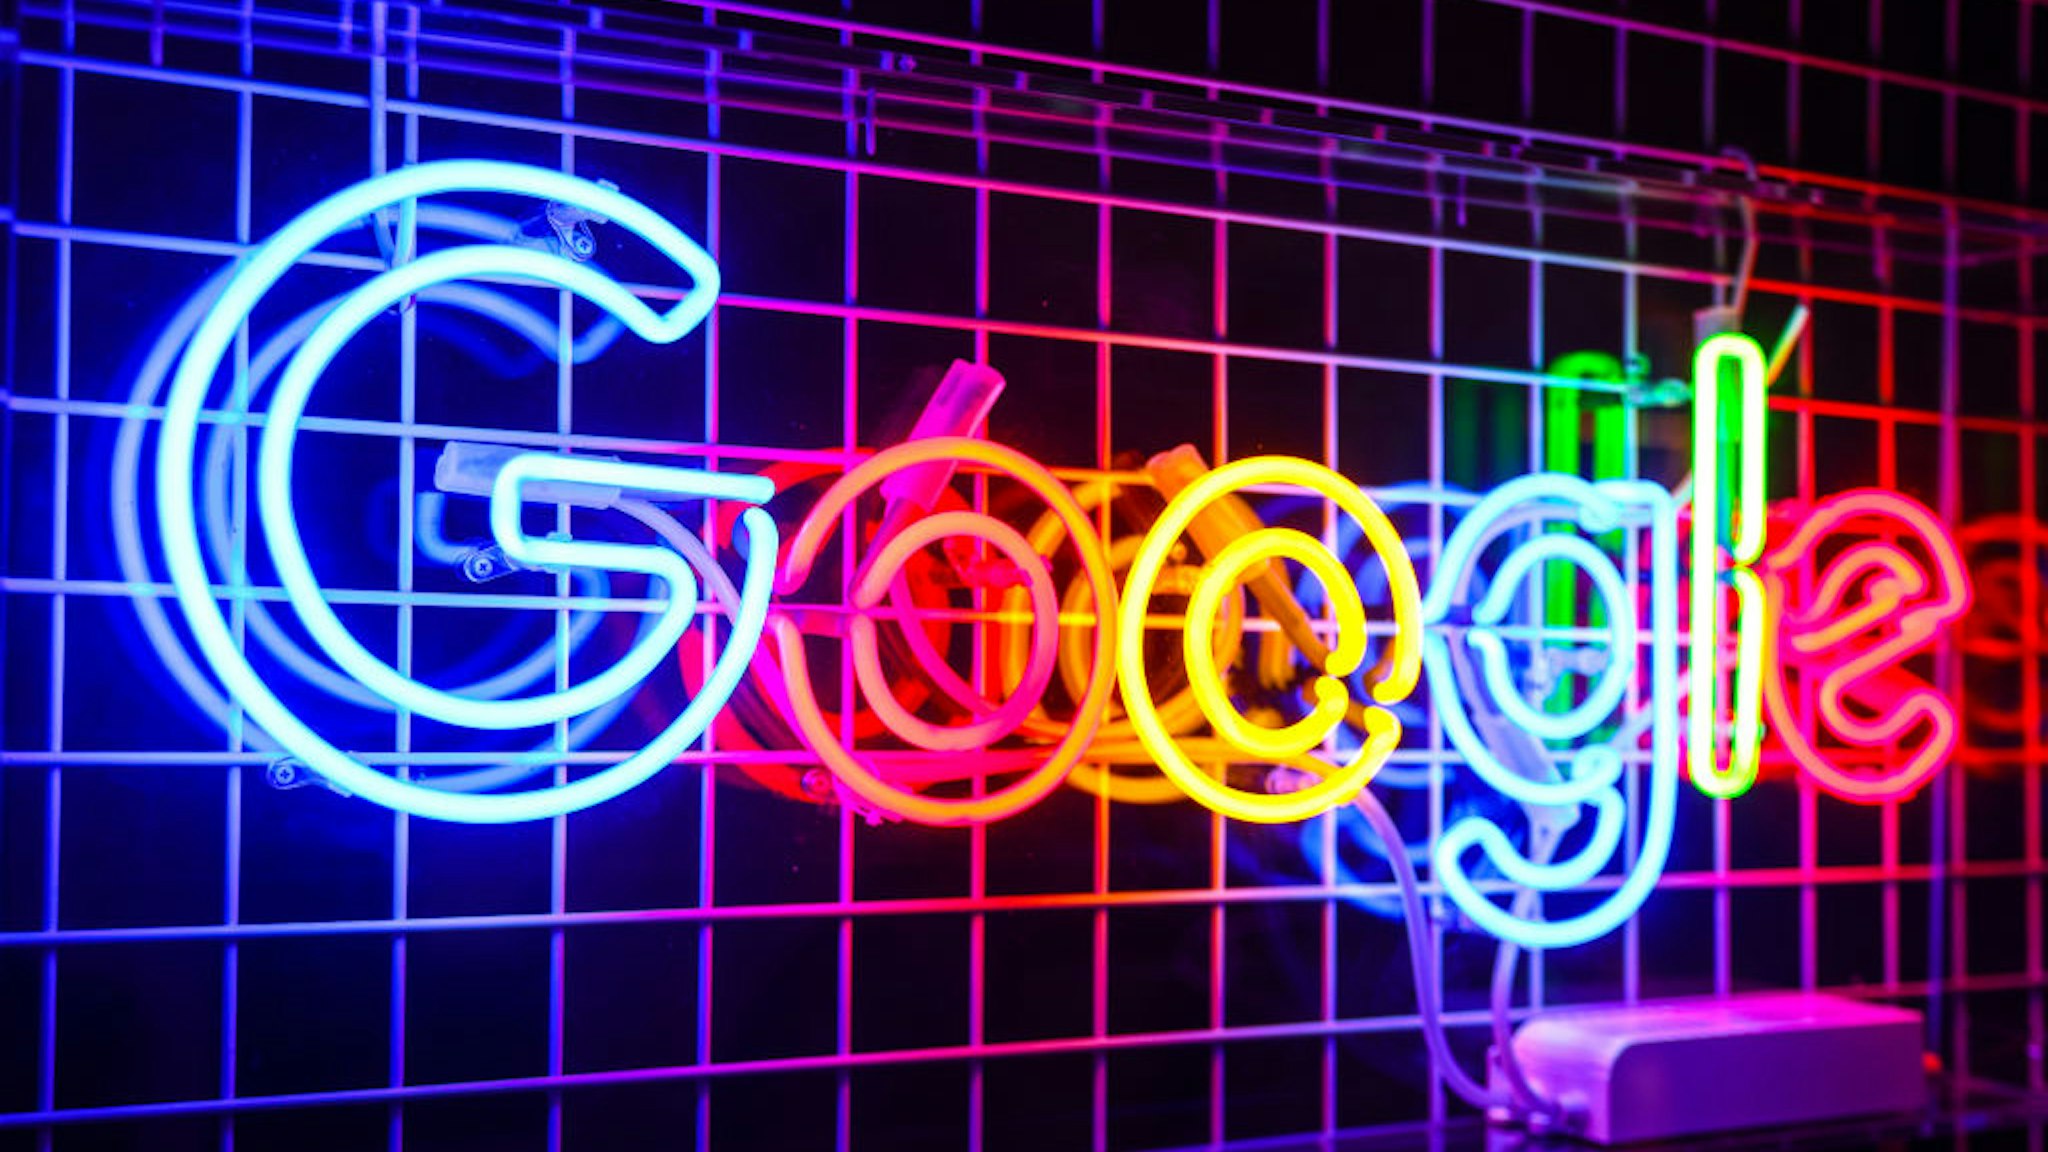 Google neon is seen during the reopening of Google office in a historical building at the Main Square in Krakow, Poland on November 29, 2022. After nearly seven years of absence, Google reopened in Krakow hiring engineers which together with hub in Warsaw will create the largest center in Europe dealing with Google Cloud computing services.